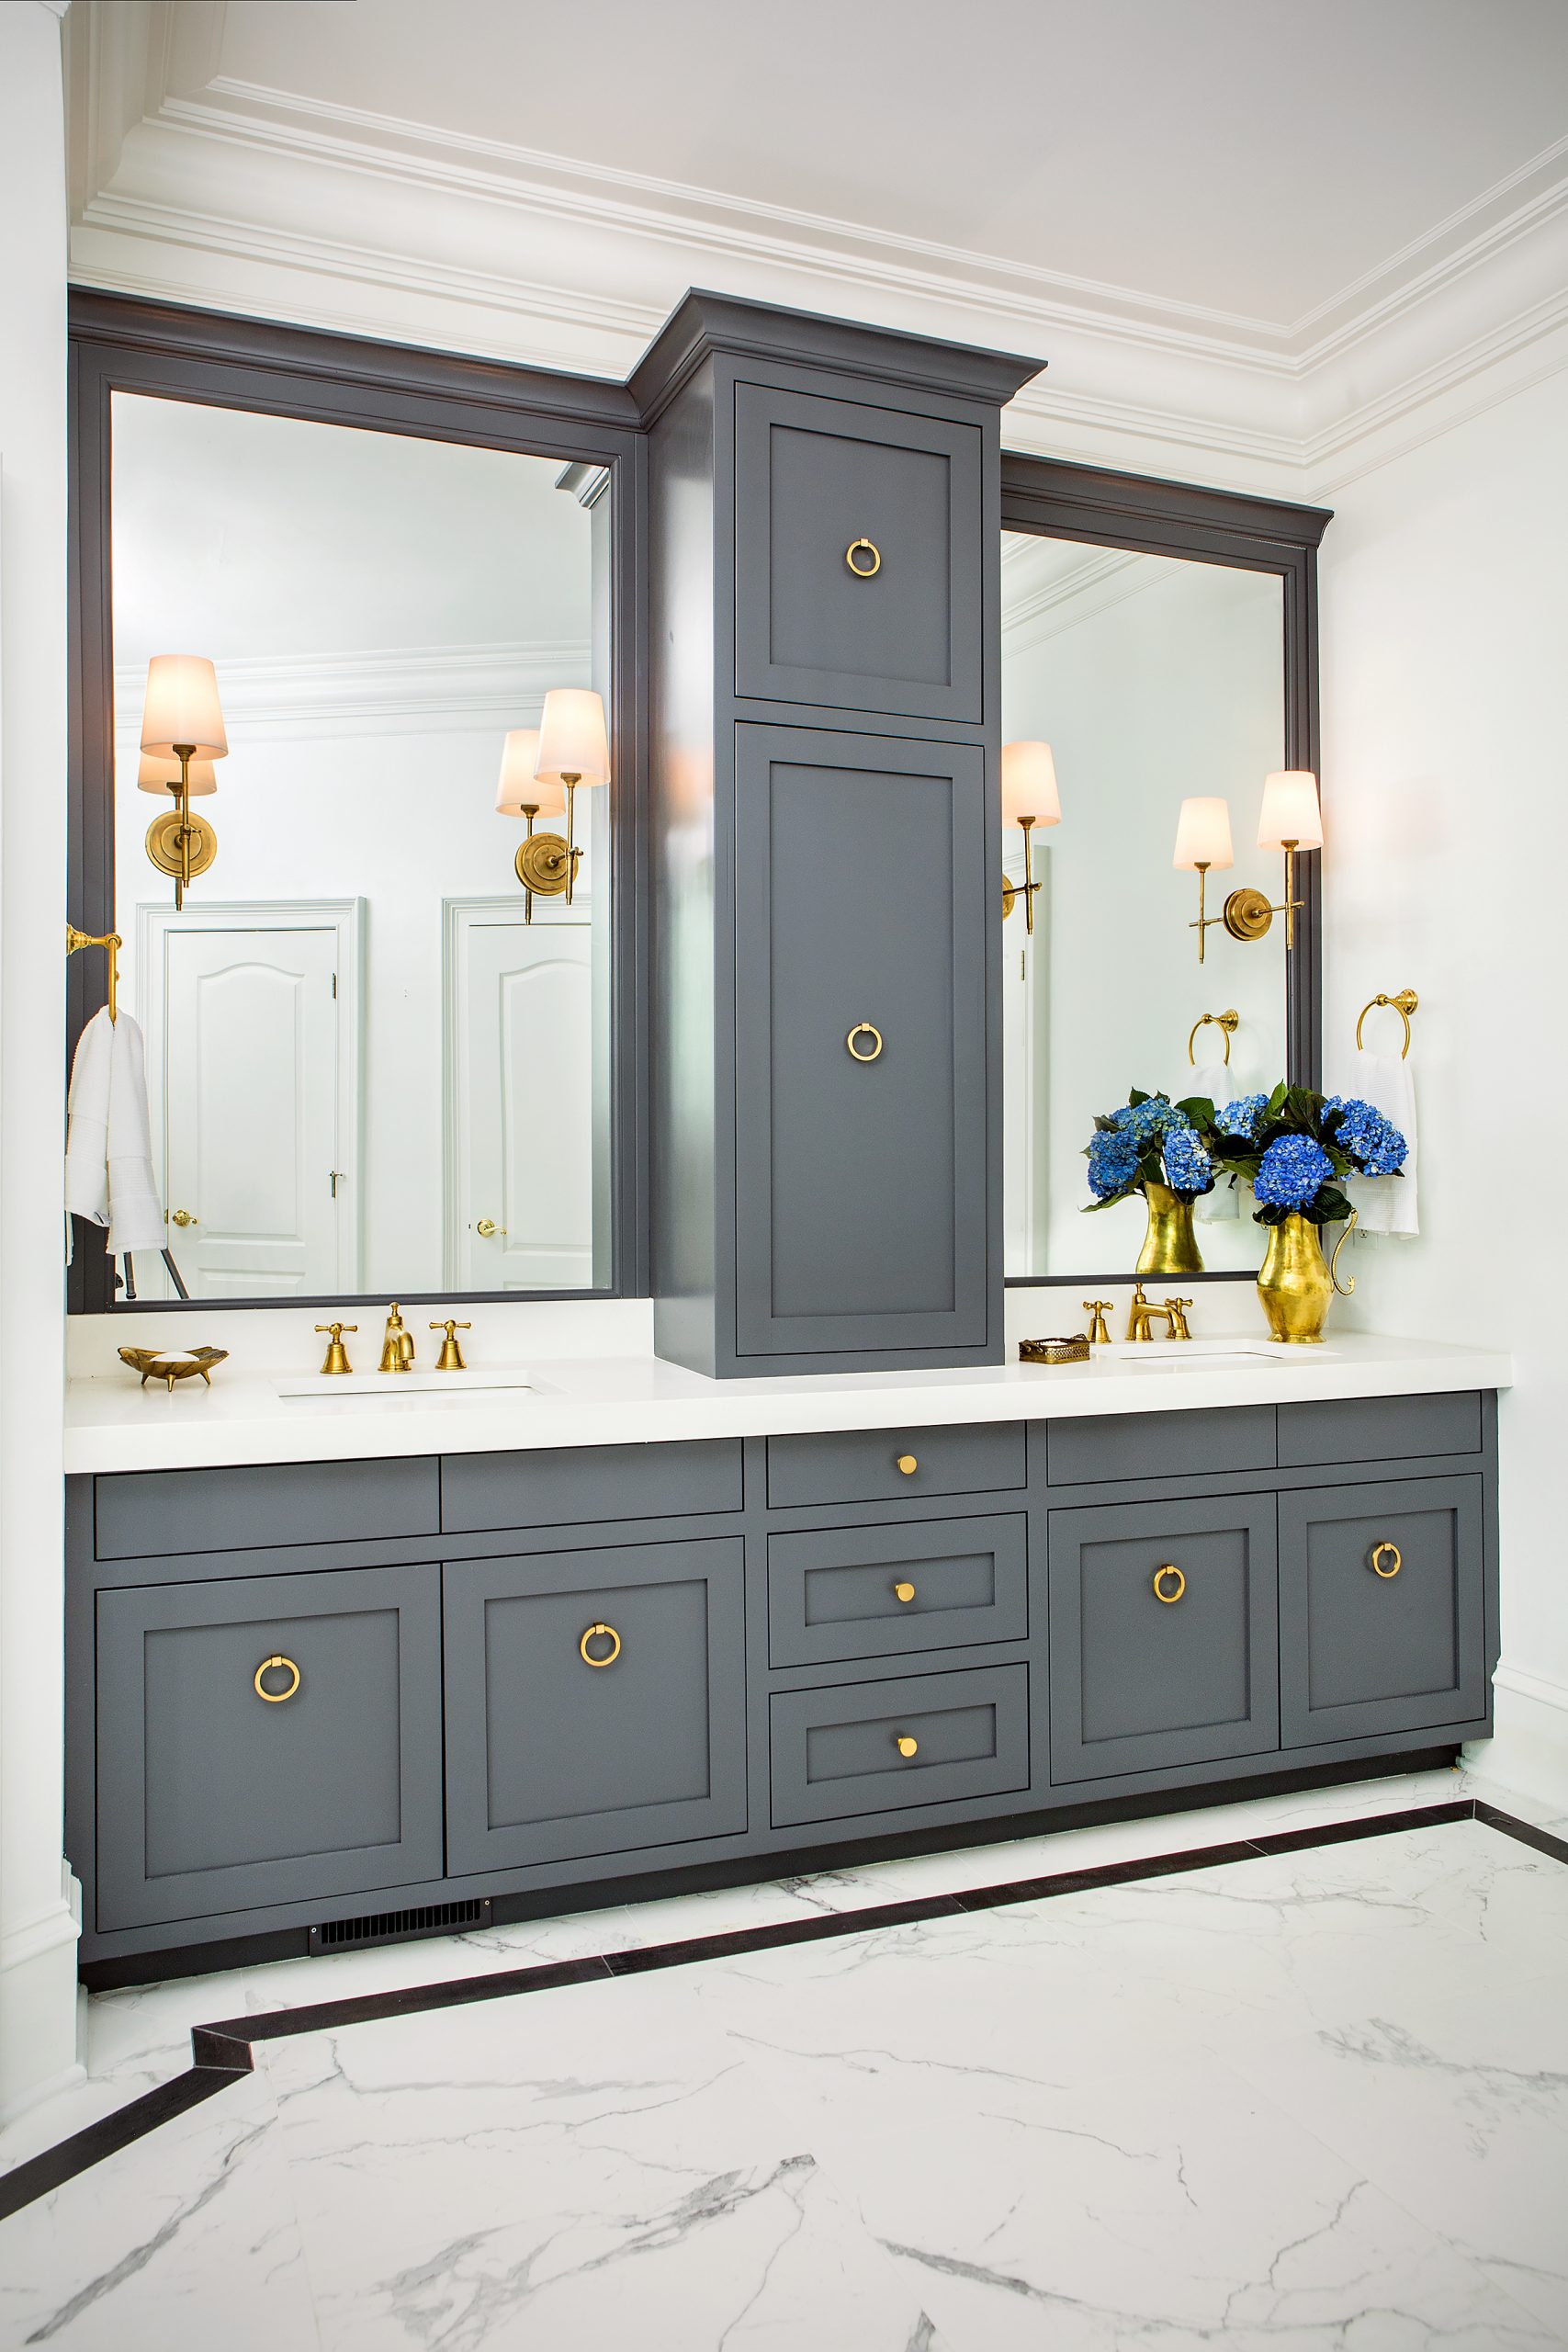 Veronica explains that the goal of the master bath renovation was providing built-in cabinetry to resemble furniture. This was accomplished with a white quartz vanity against the Sherwin-Williams Peppercorn cabinets, accented by stylish brass pulls and sconces installed directly into the mirror.